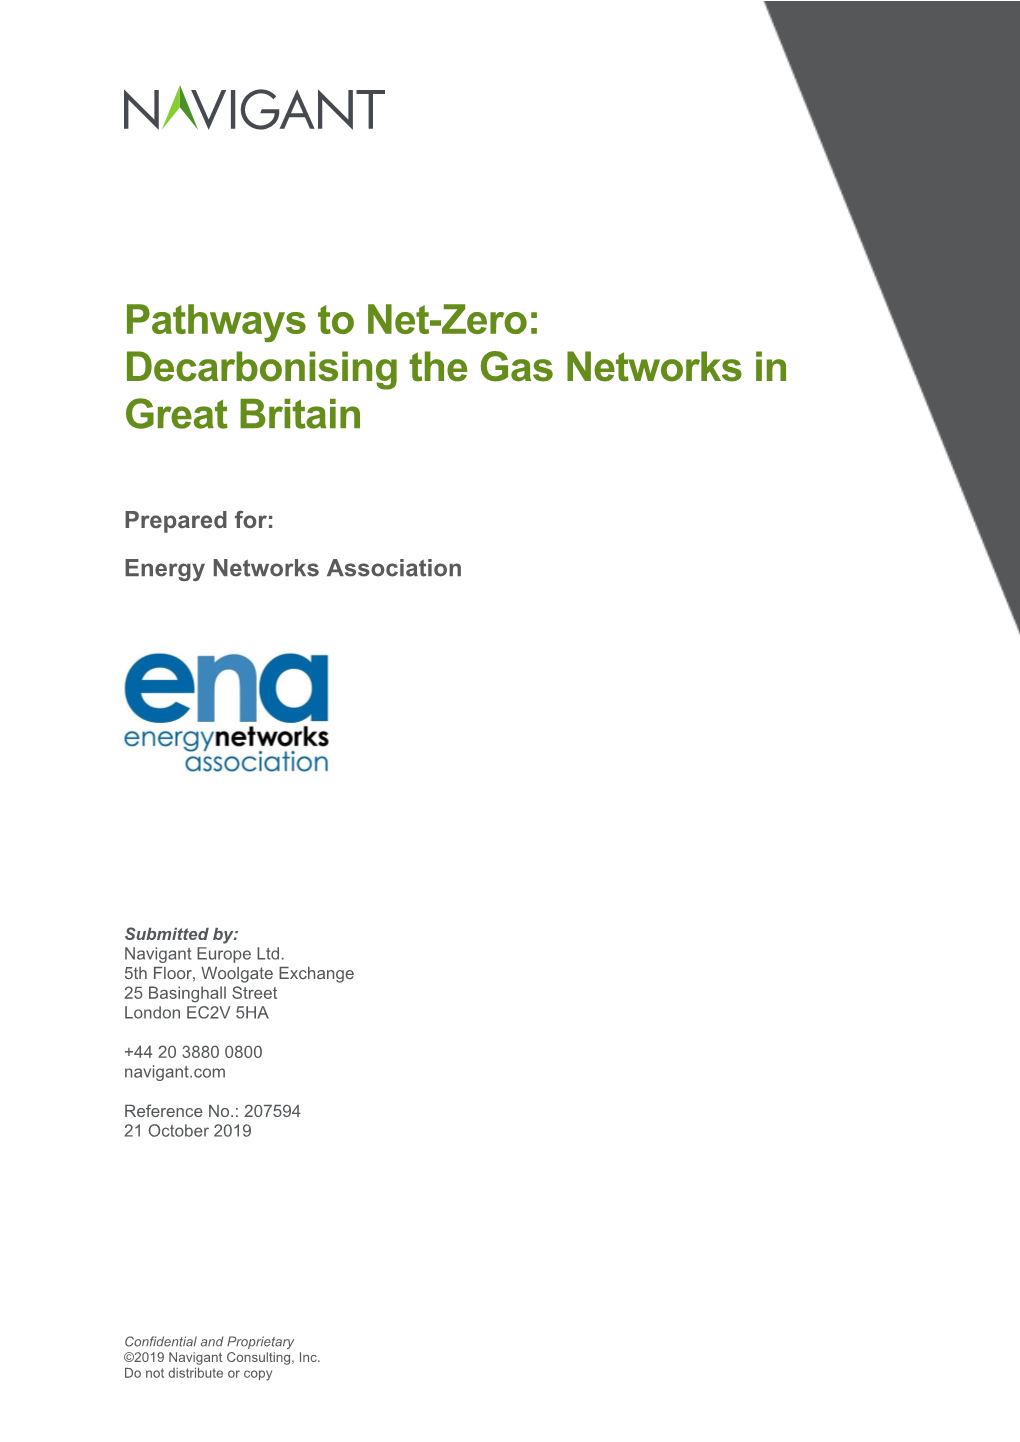 Pathways to Net-Zero: Decarbonising the Gas Networks in Great Britain